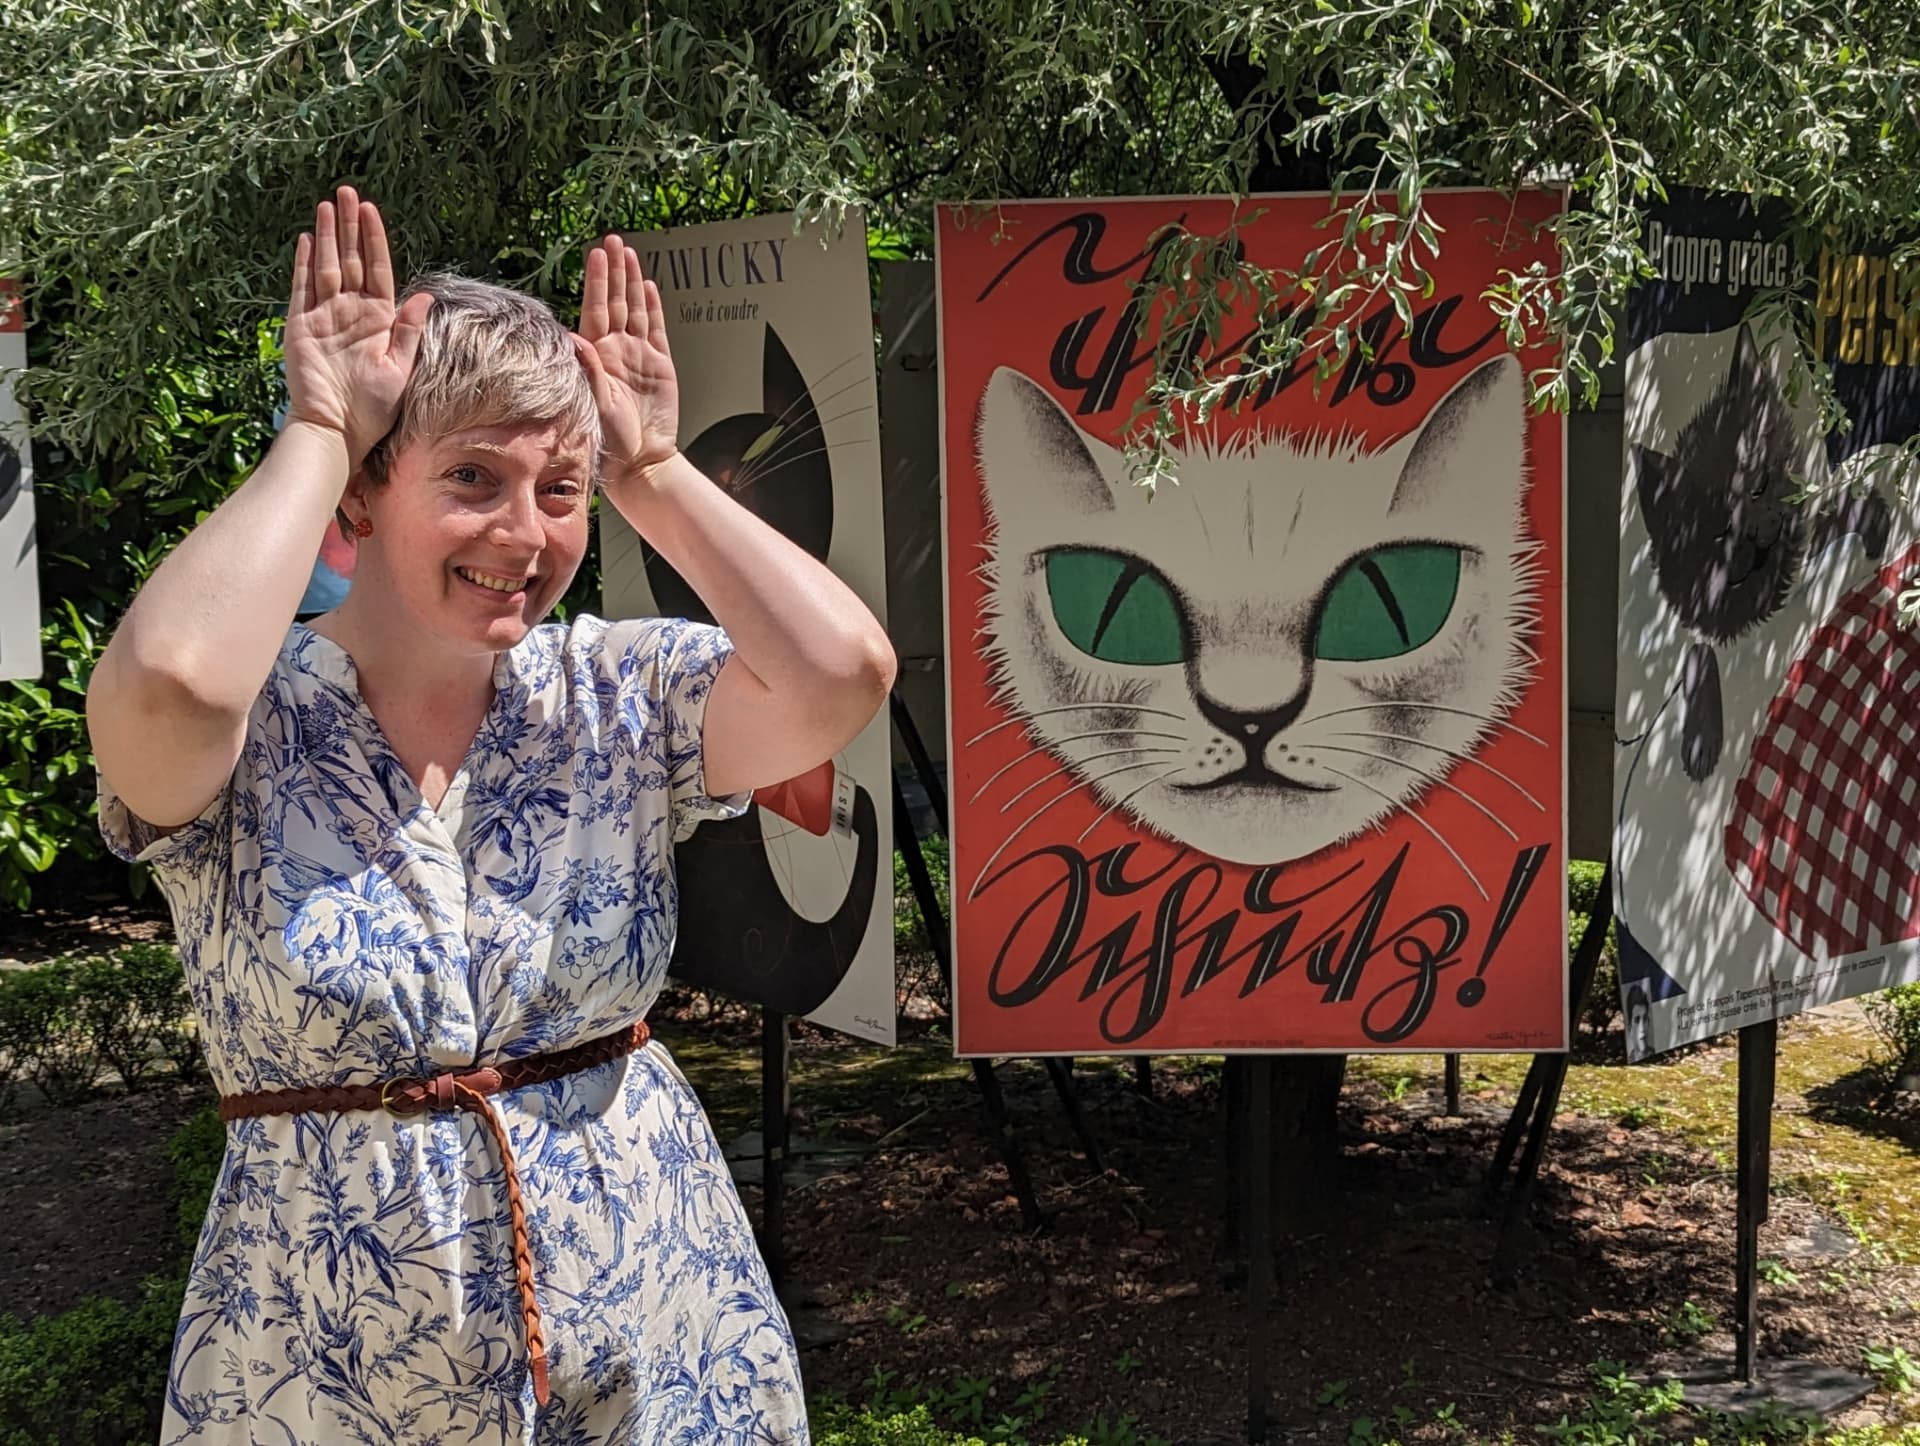 Vickie making cat ears with her hands in front of a cat-themed poster